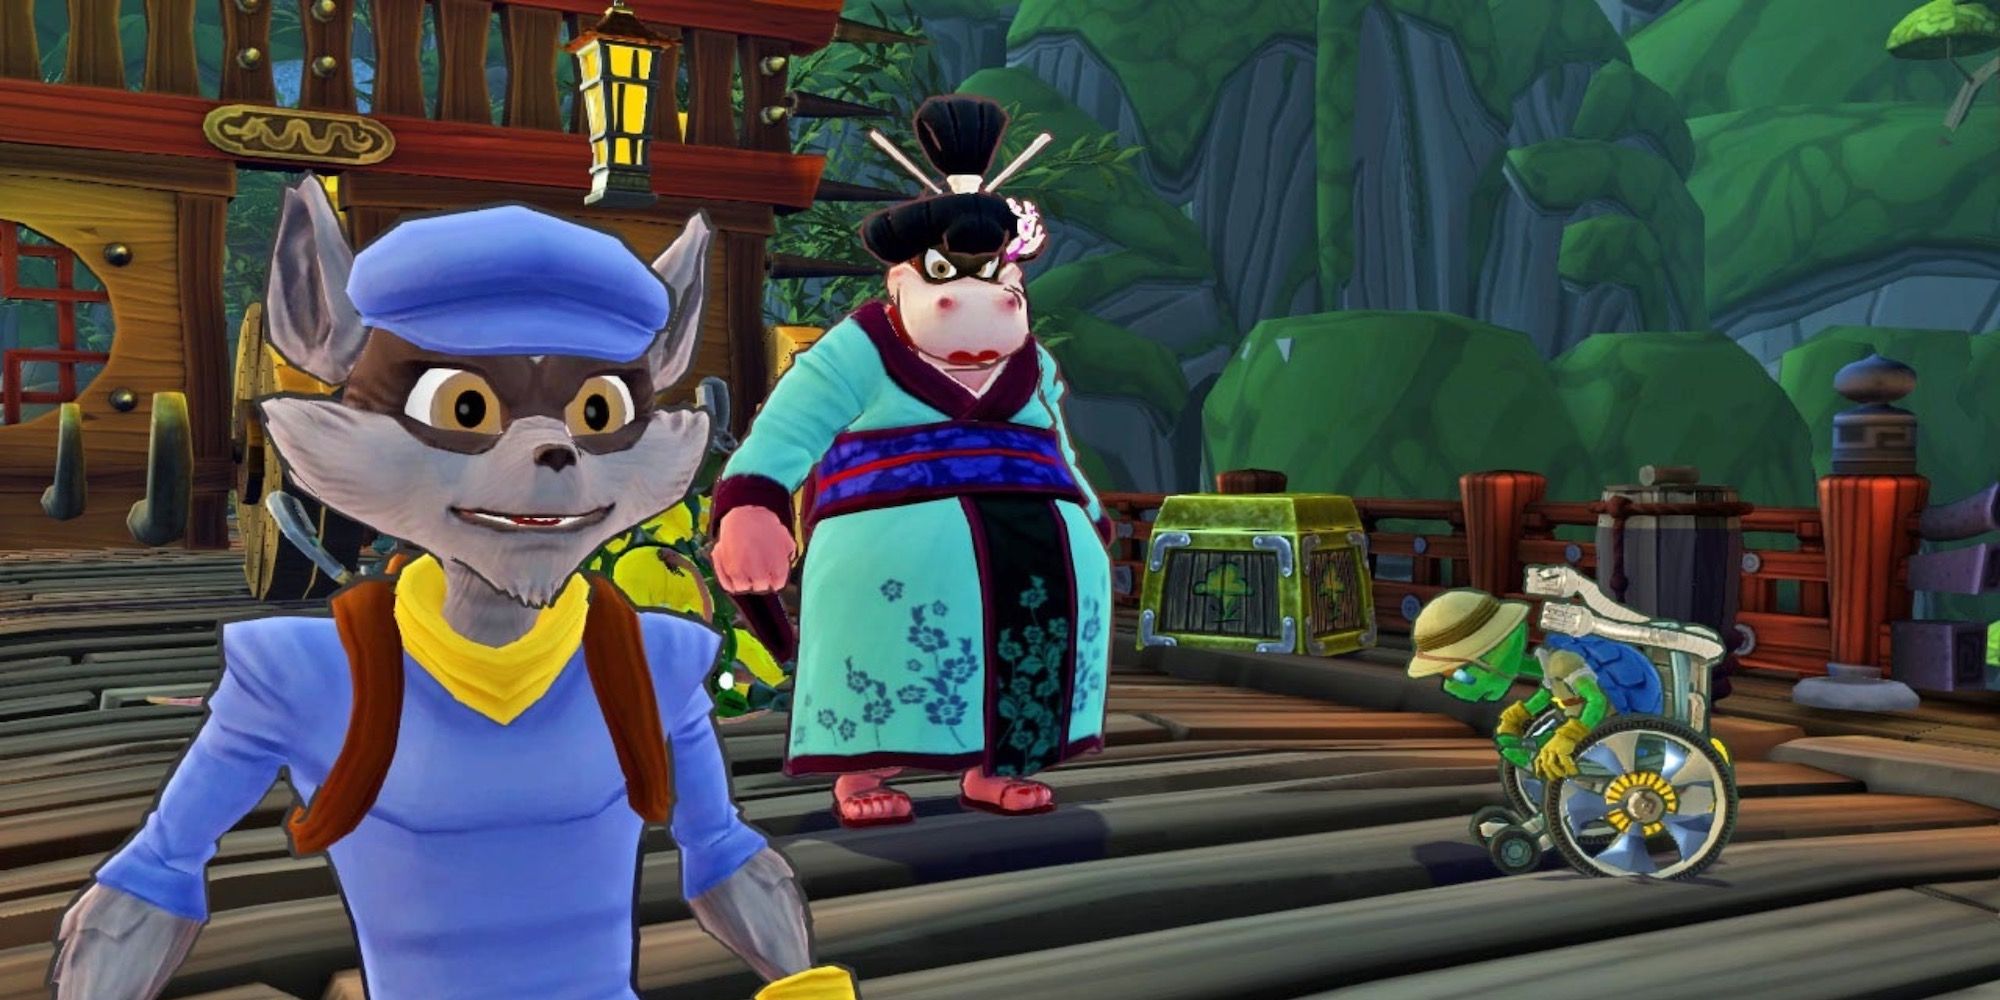 A cutscene featuring characters in Sly Cooper Thieves In Time